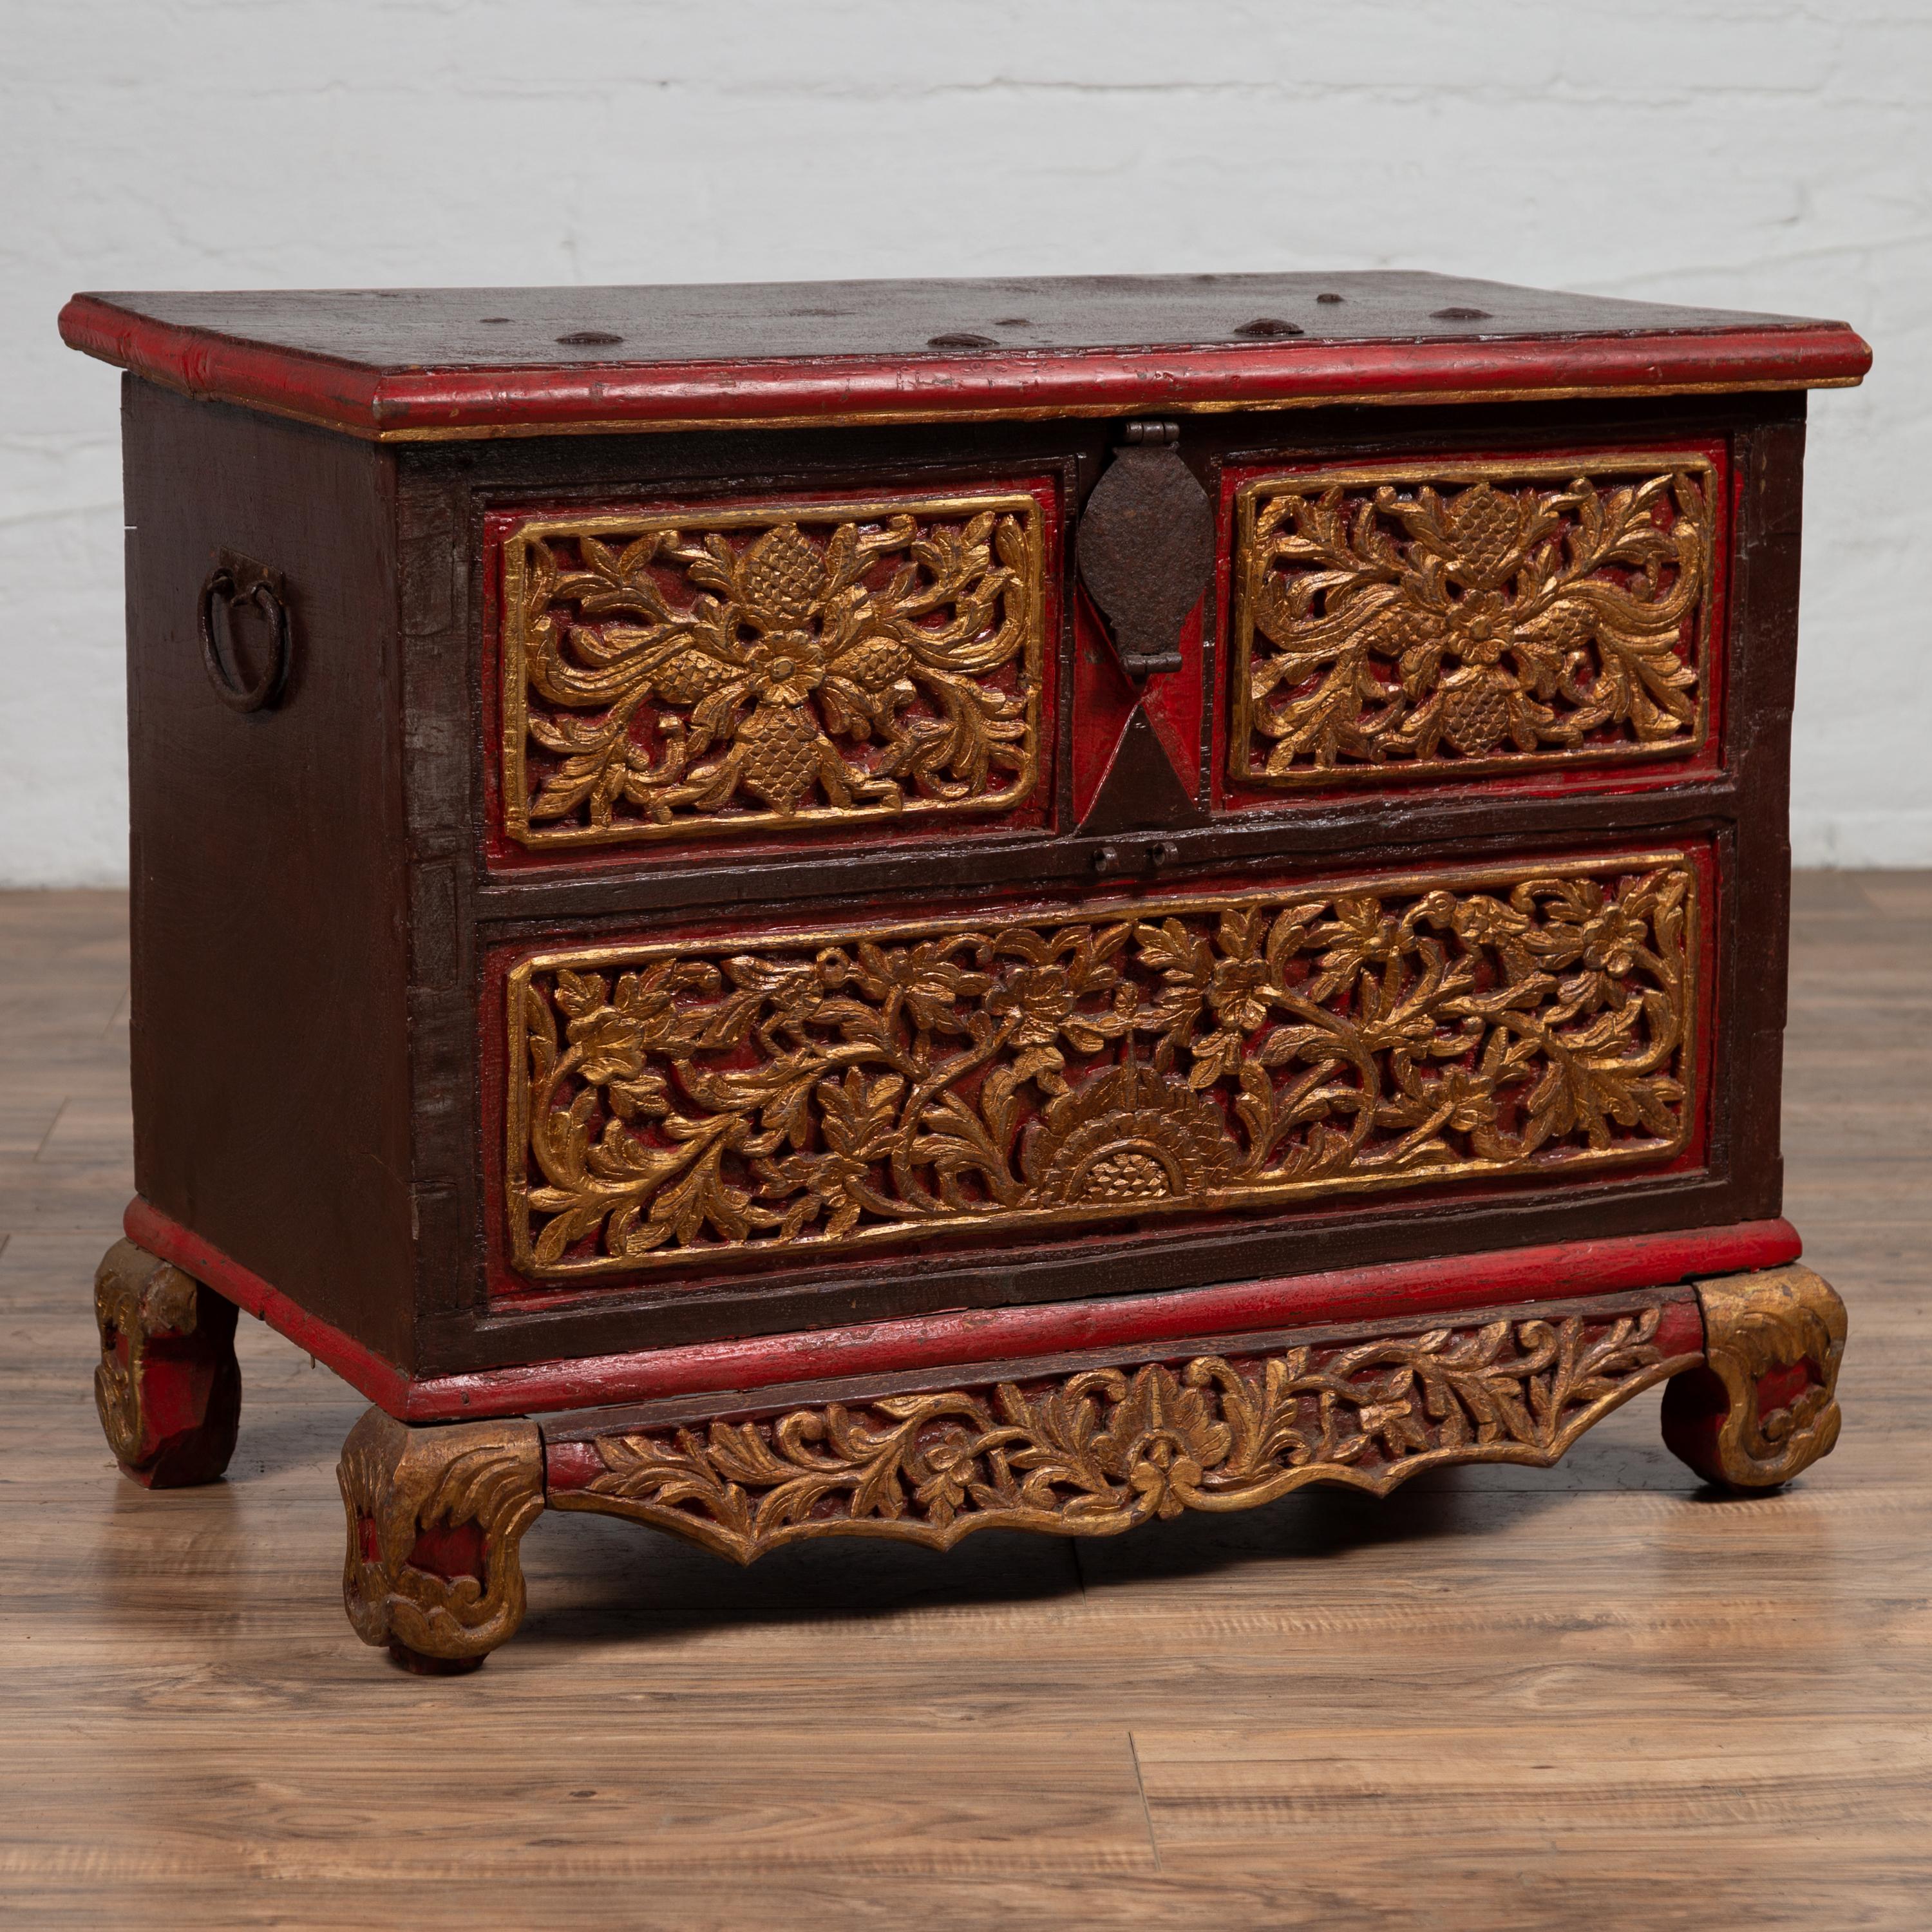 An antique Indonesian floral carved wooden blanket chest from the 19th century, with red, brown and gilt accents. This 19th-century Indonesian blanket chest from Madura, an island off Java, is a remarkable artifact that brings both artistic flair